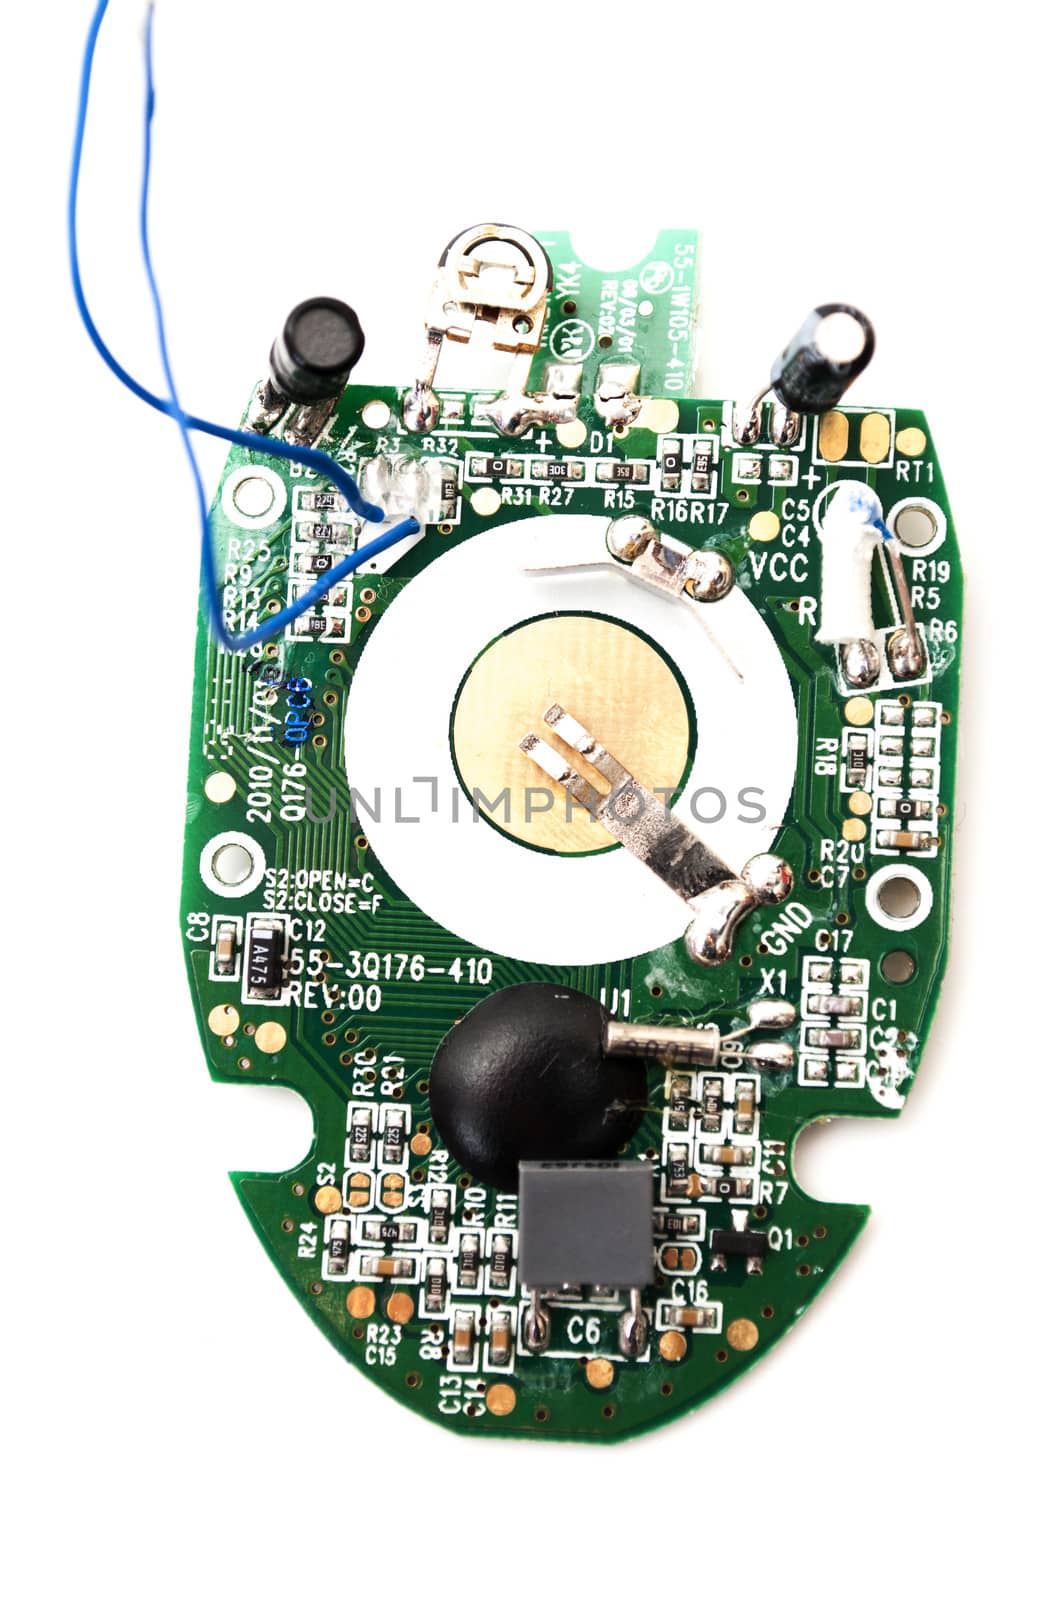 microcontroller board on a white background